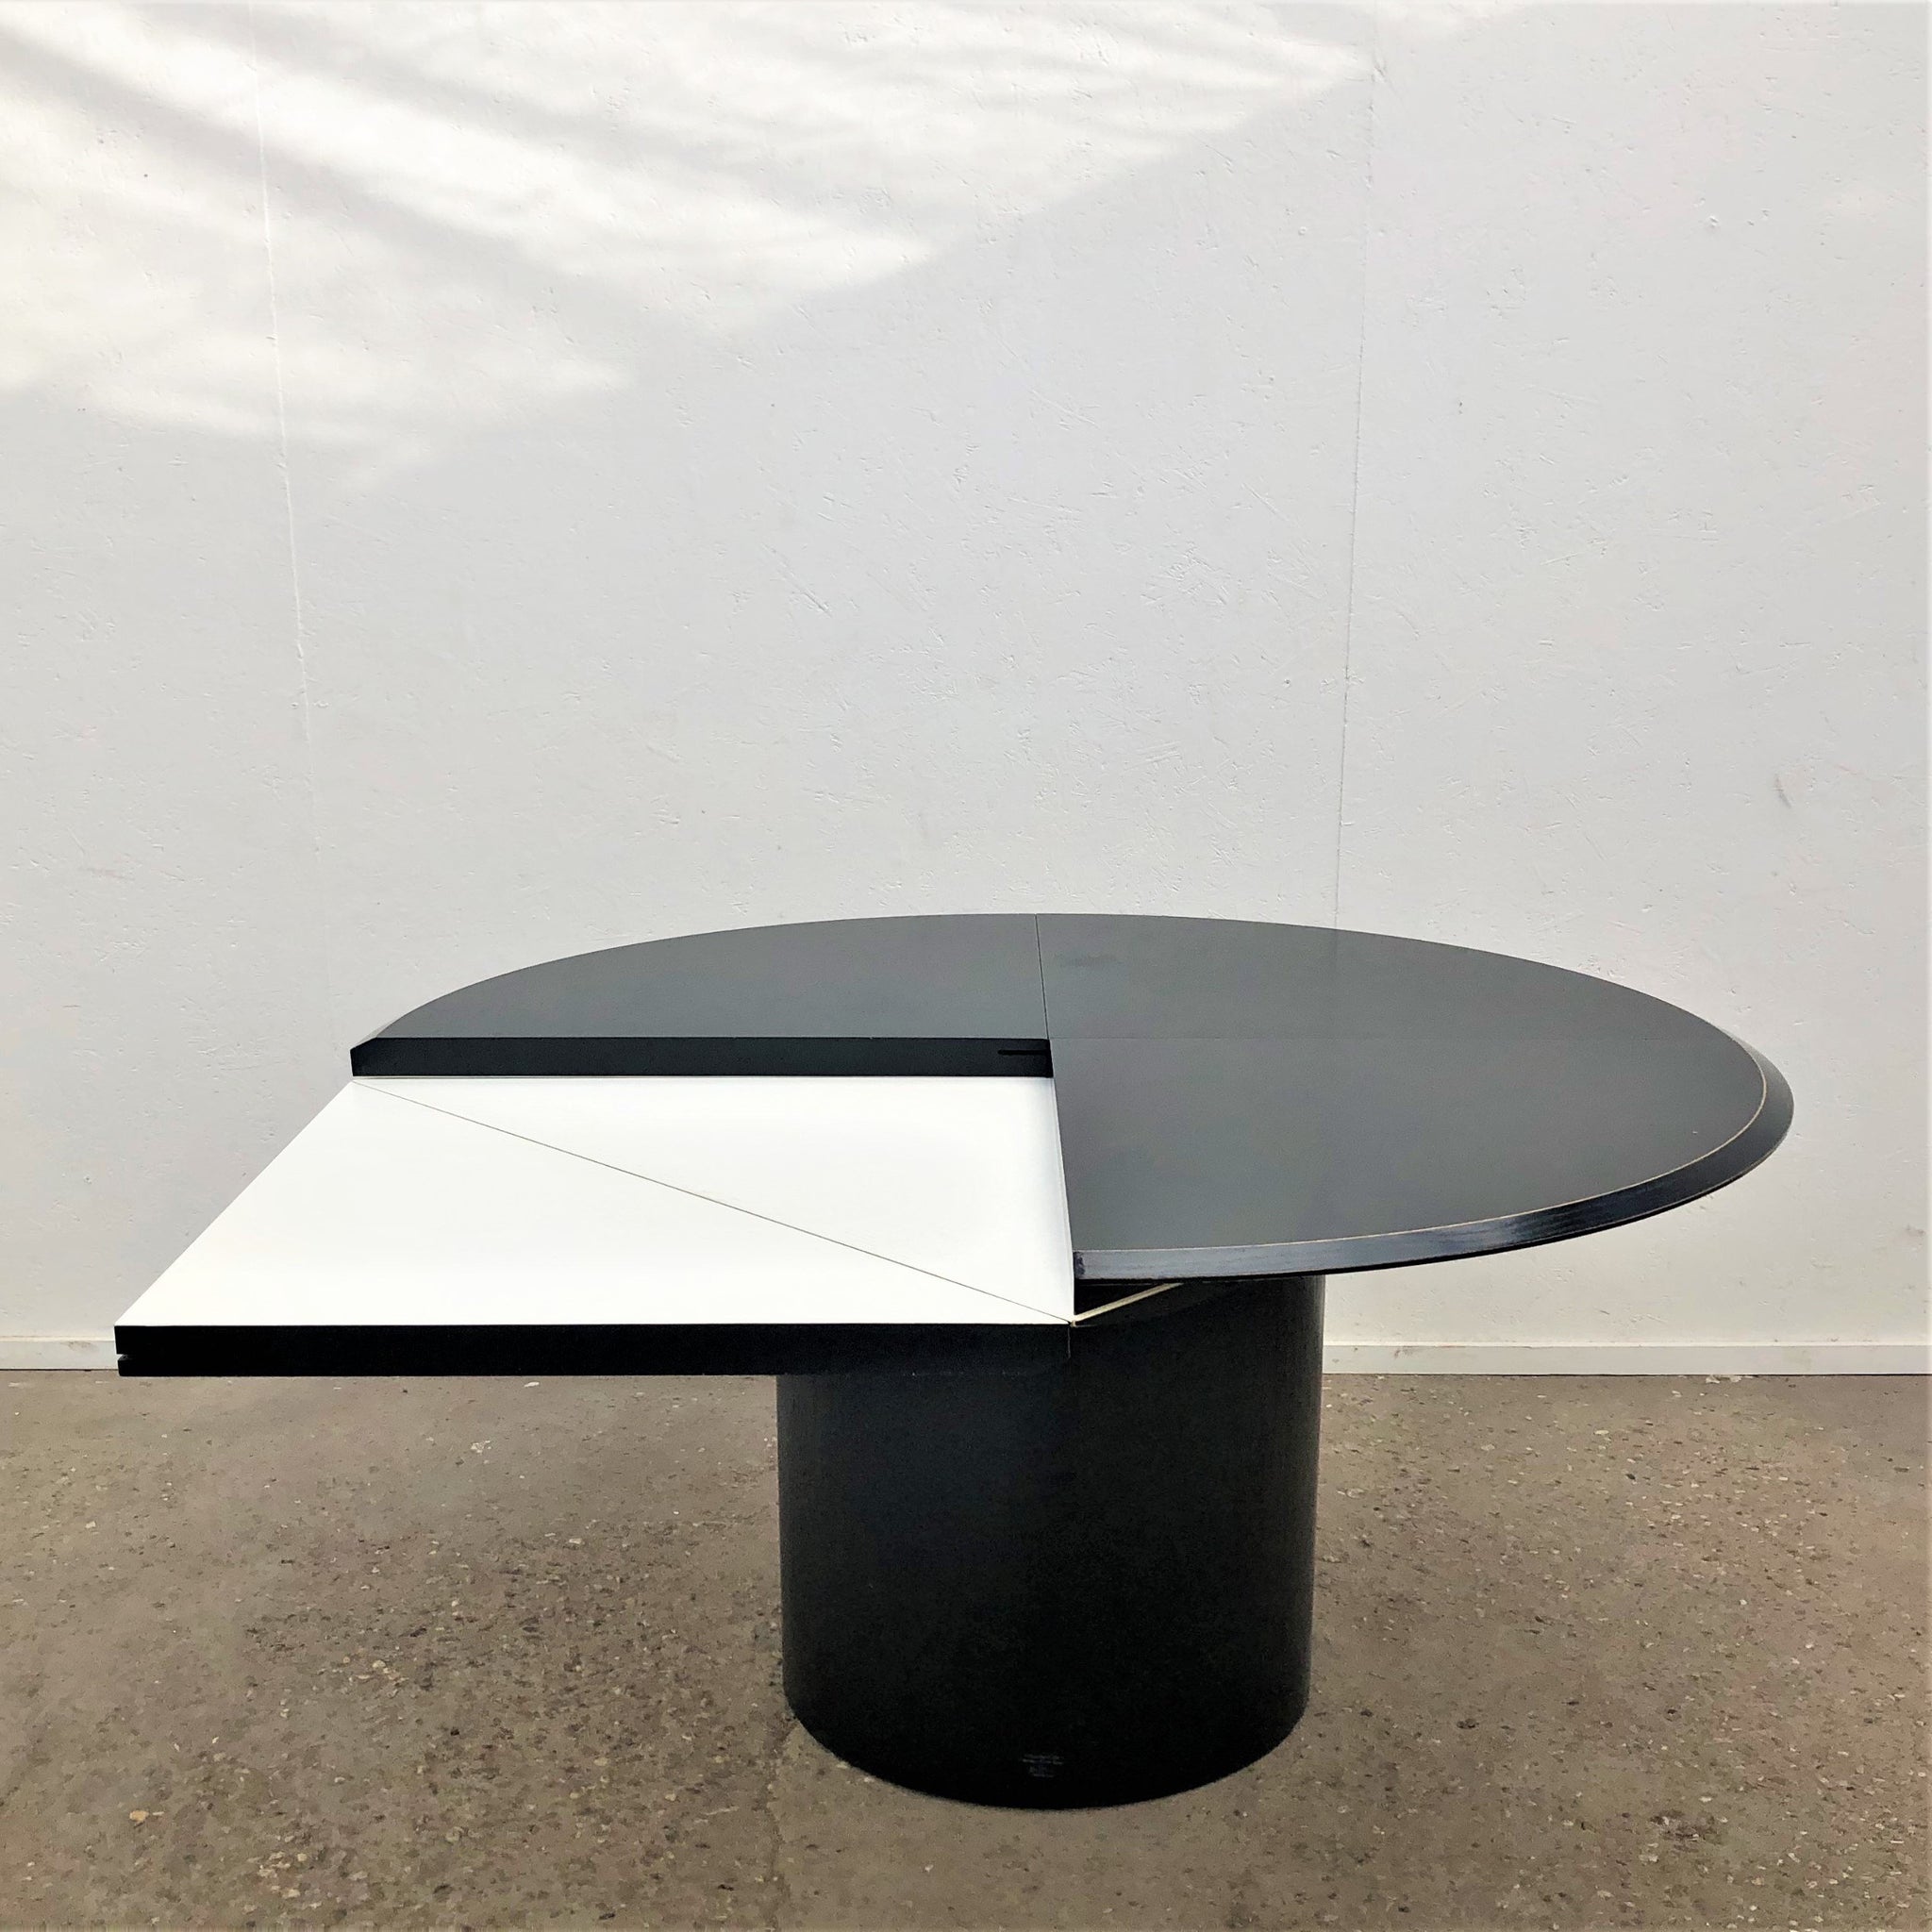 Quadrondo dining table by Erwin Nagel for Rosenthal